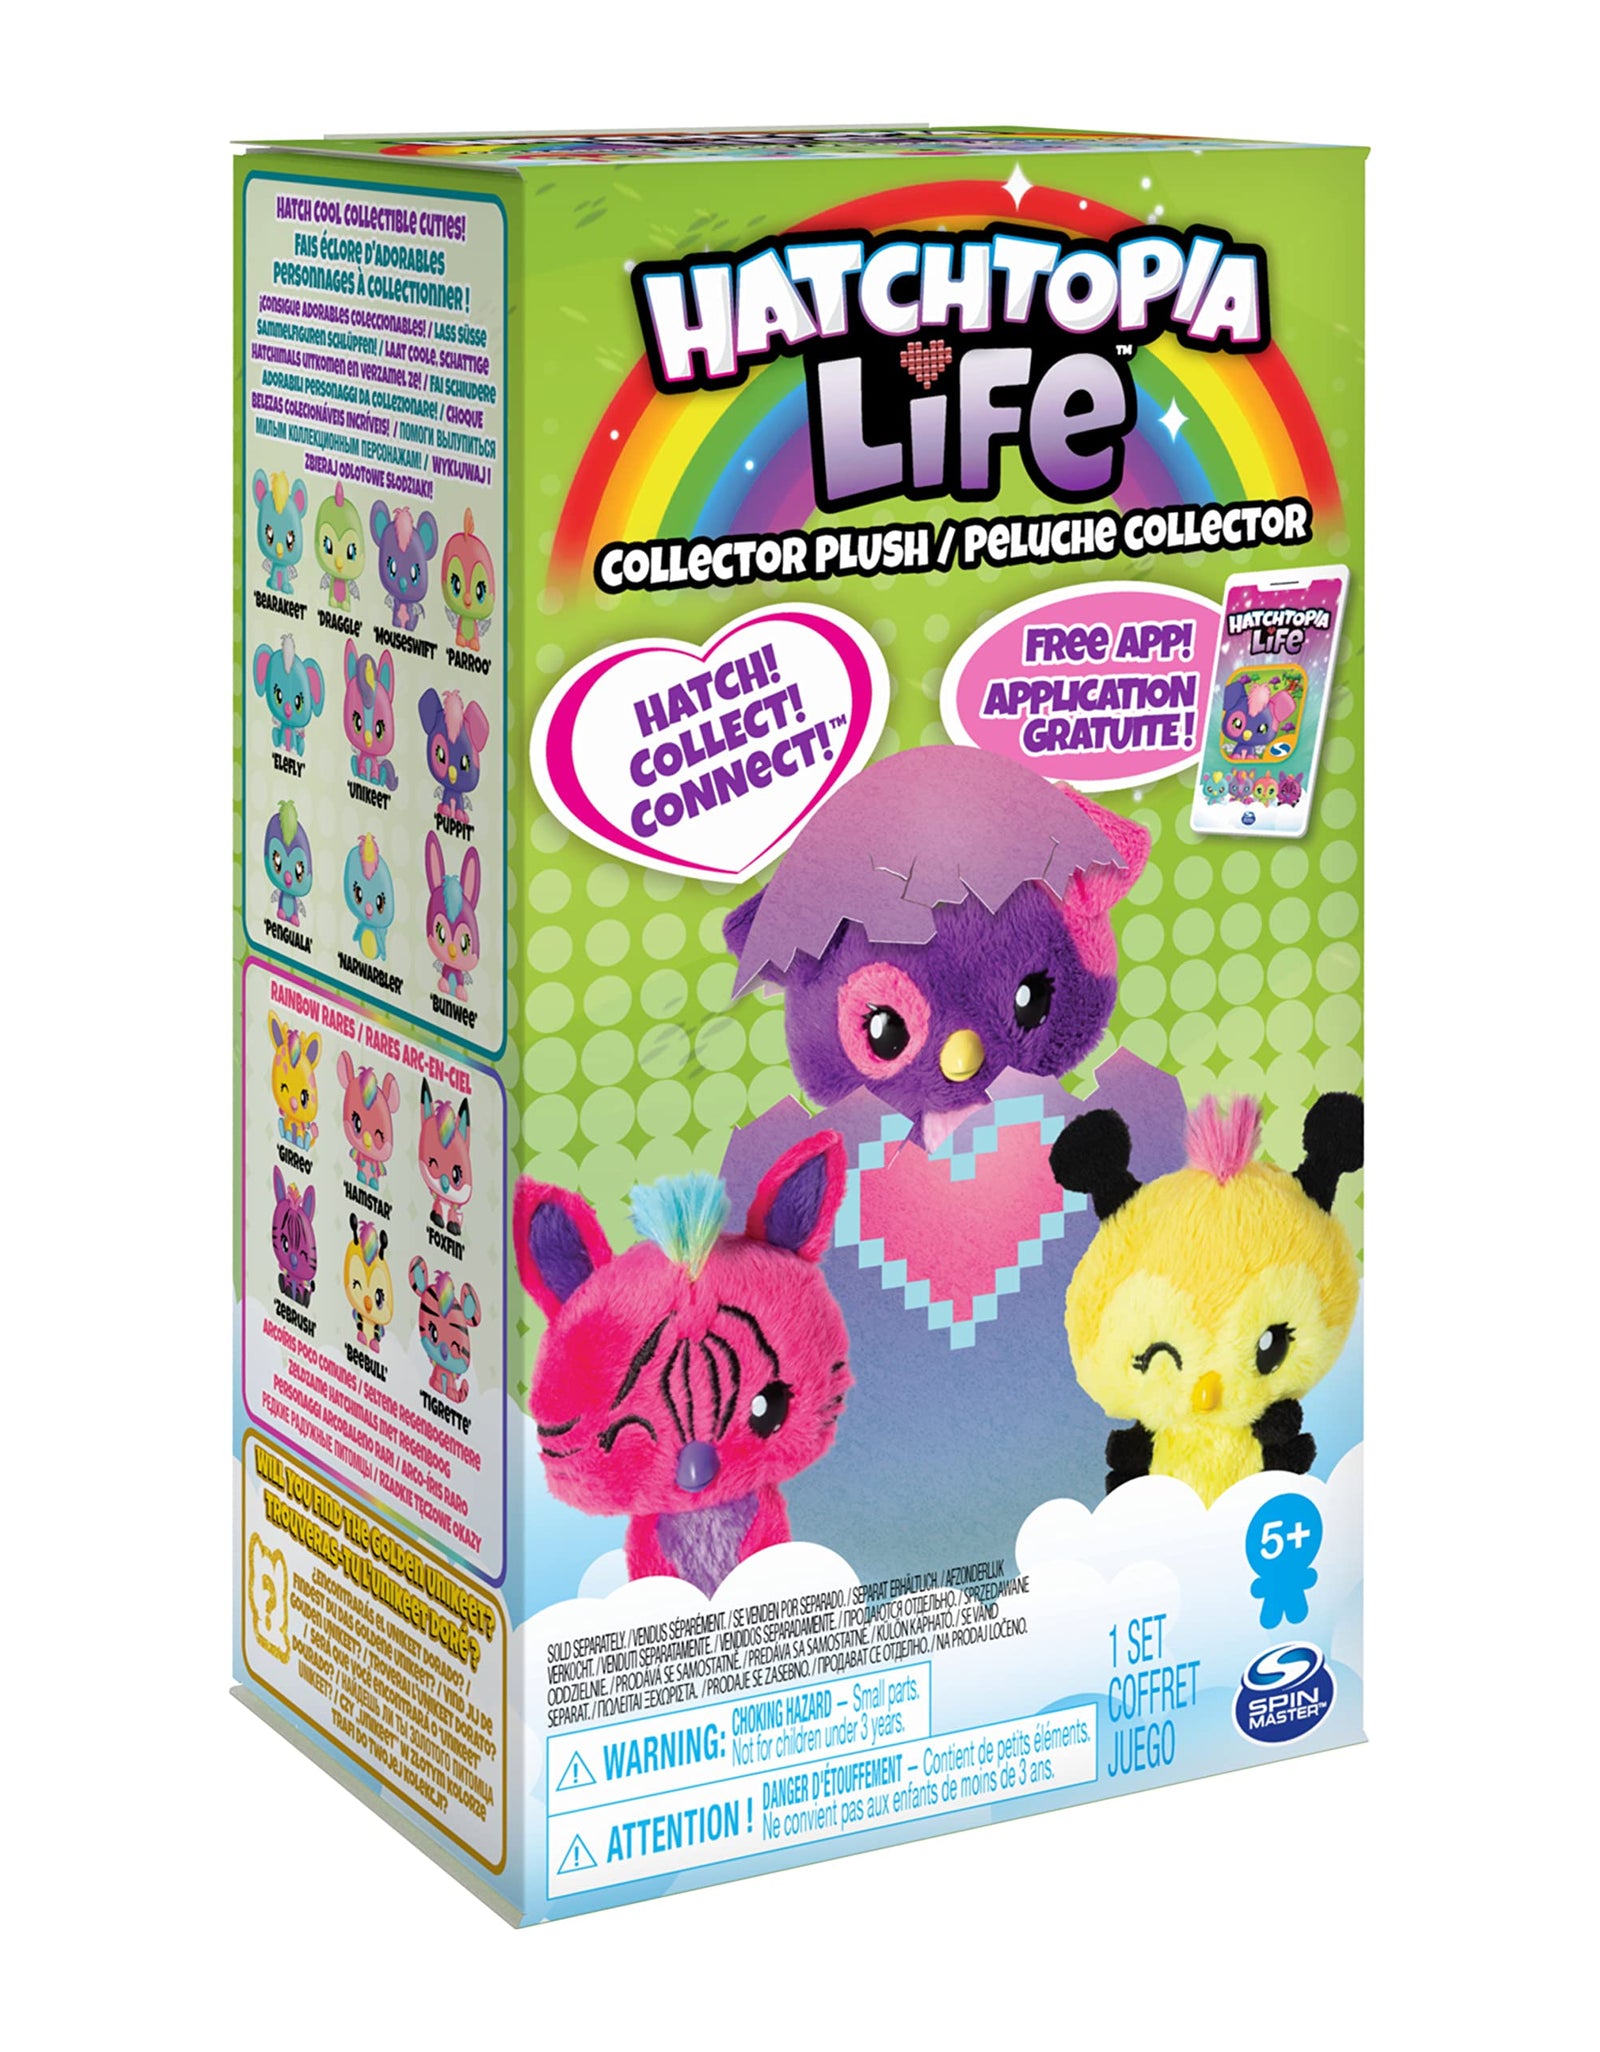 Hatchimals Hatchtopia Life 2-Pack, 2-inch tall Plush Hatchimals with Interactive Game, for Ages 5 and up (Styles May Vary)